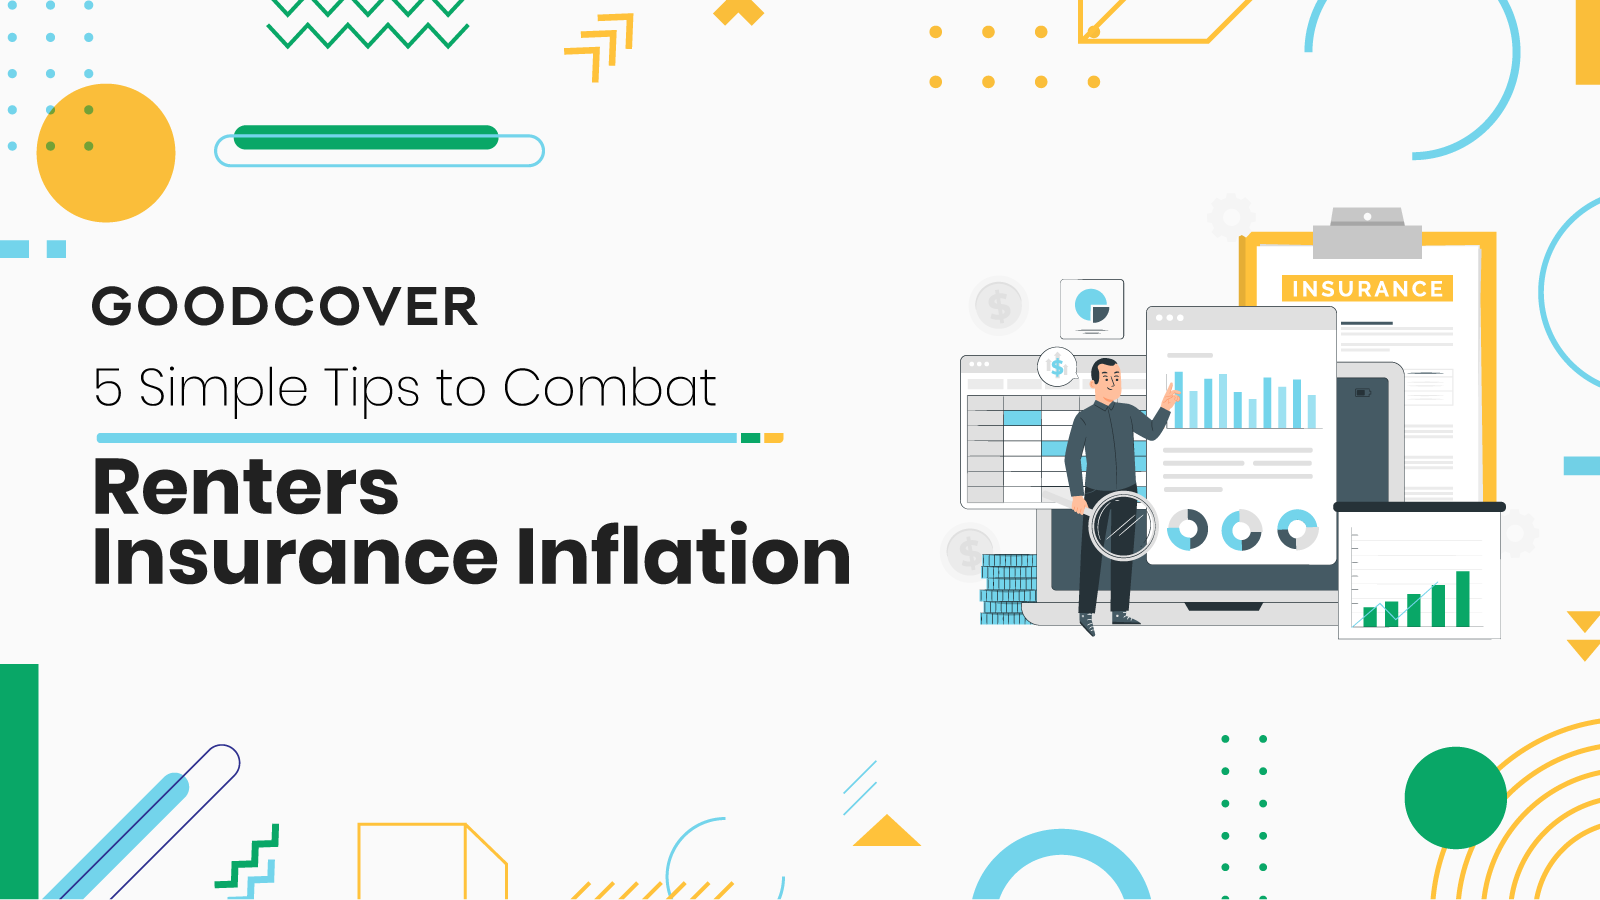 Insurance inflation: forecasting how inflation affects your renters insurance.